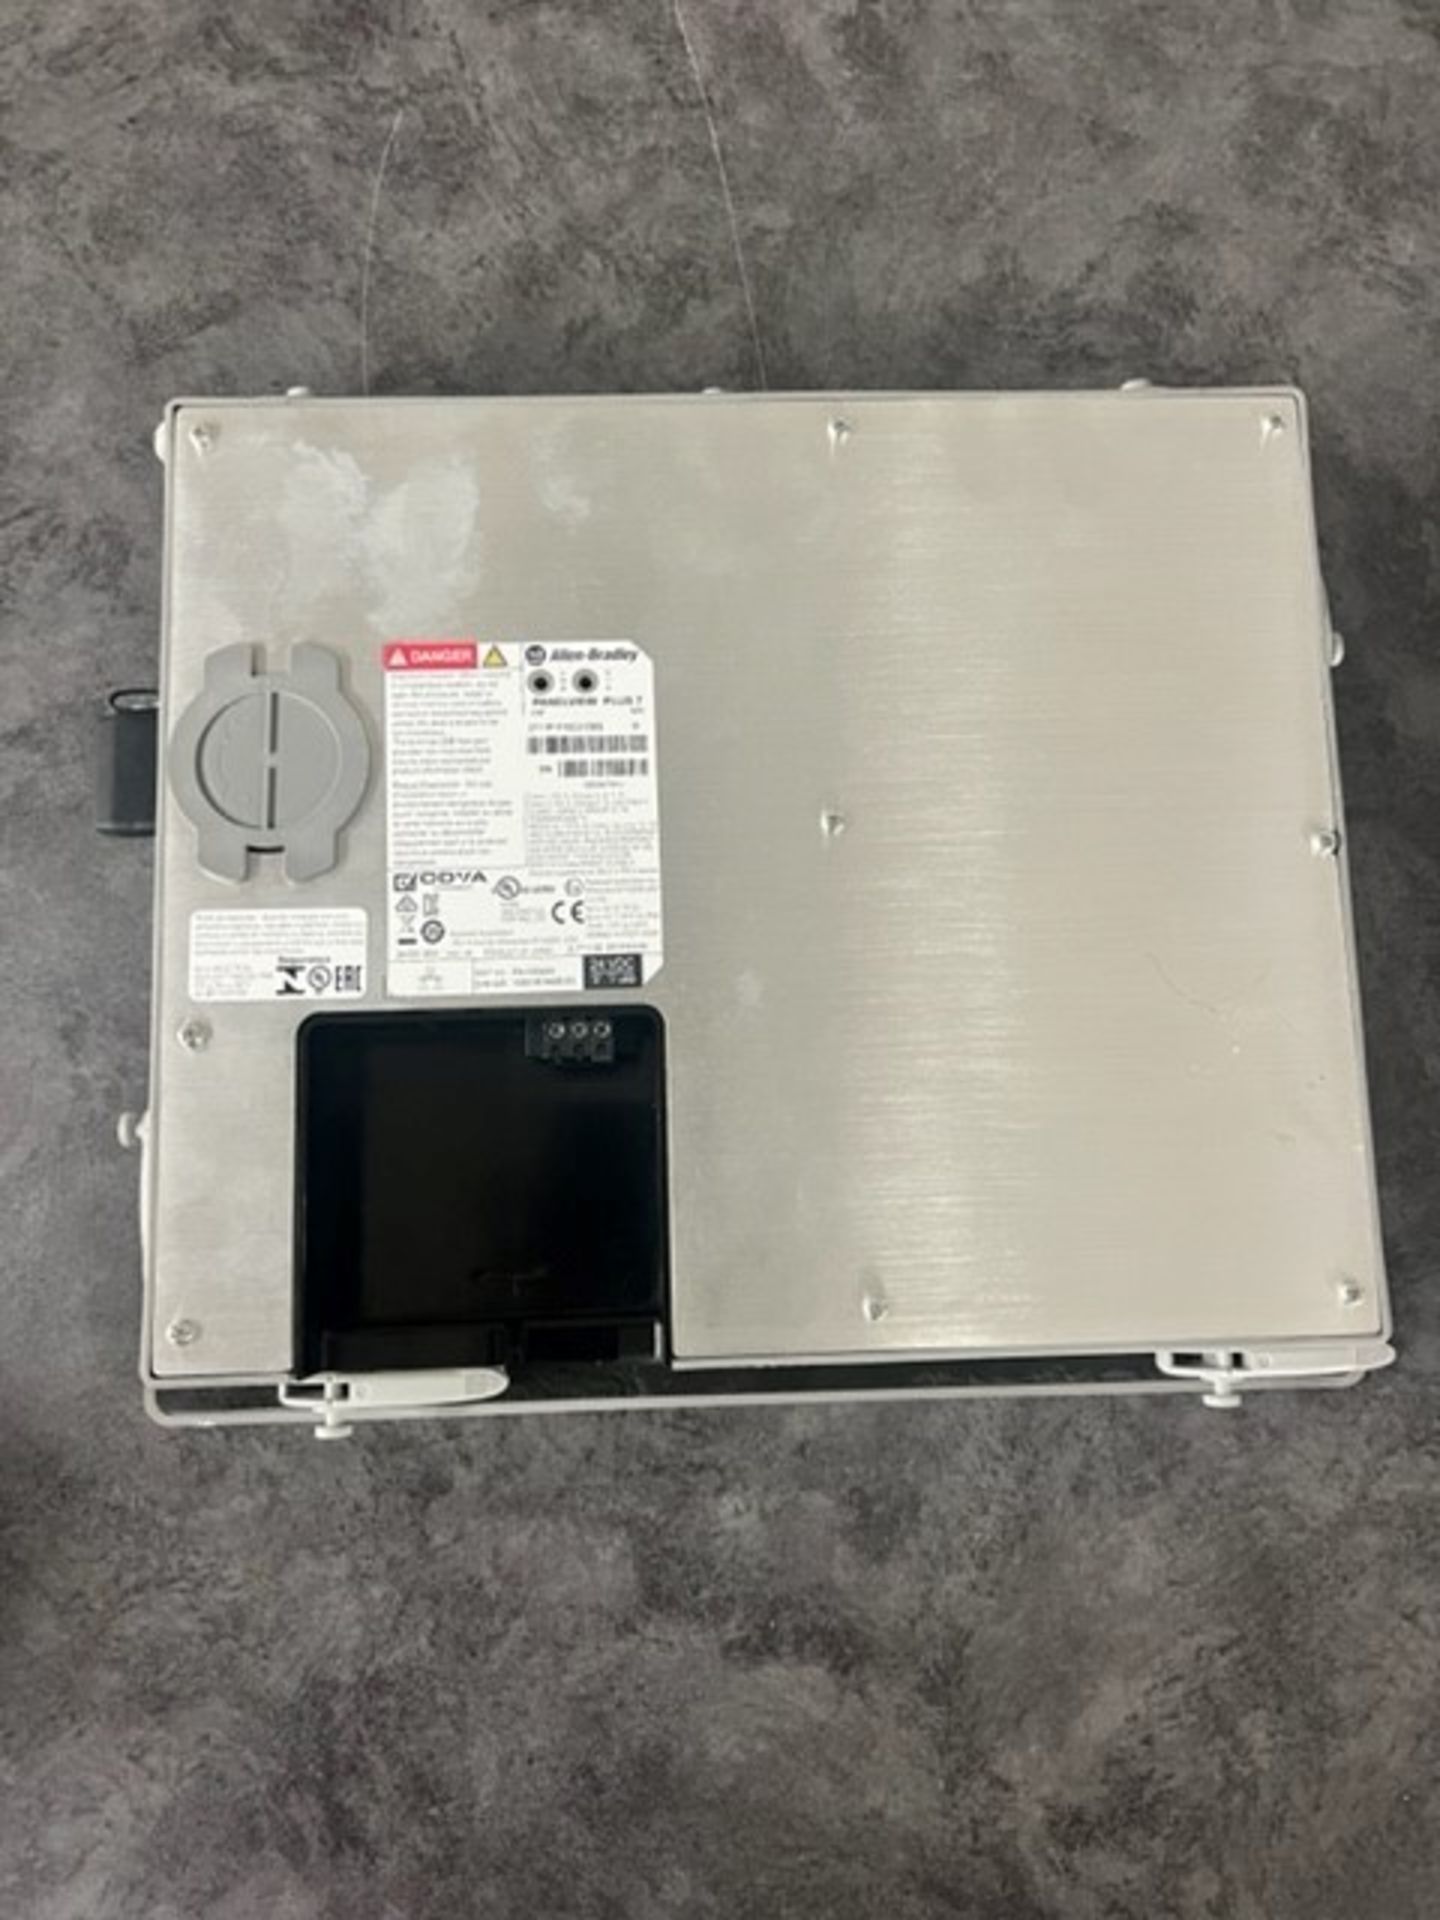 Allen Bradley PanelView Plus 7 Touchpad, Display, Cat #2711P-T10C21D8S, Ser B, (Load Fee $50) ( - Image 2 of 3